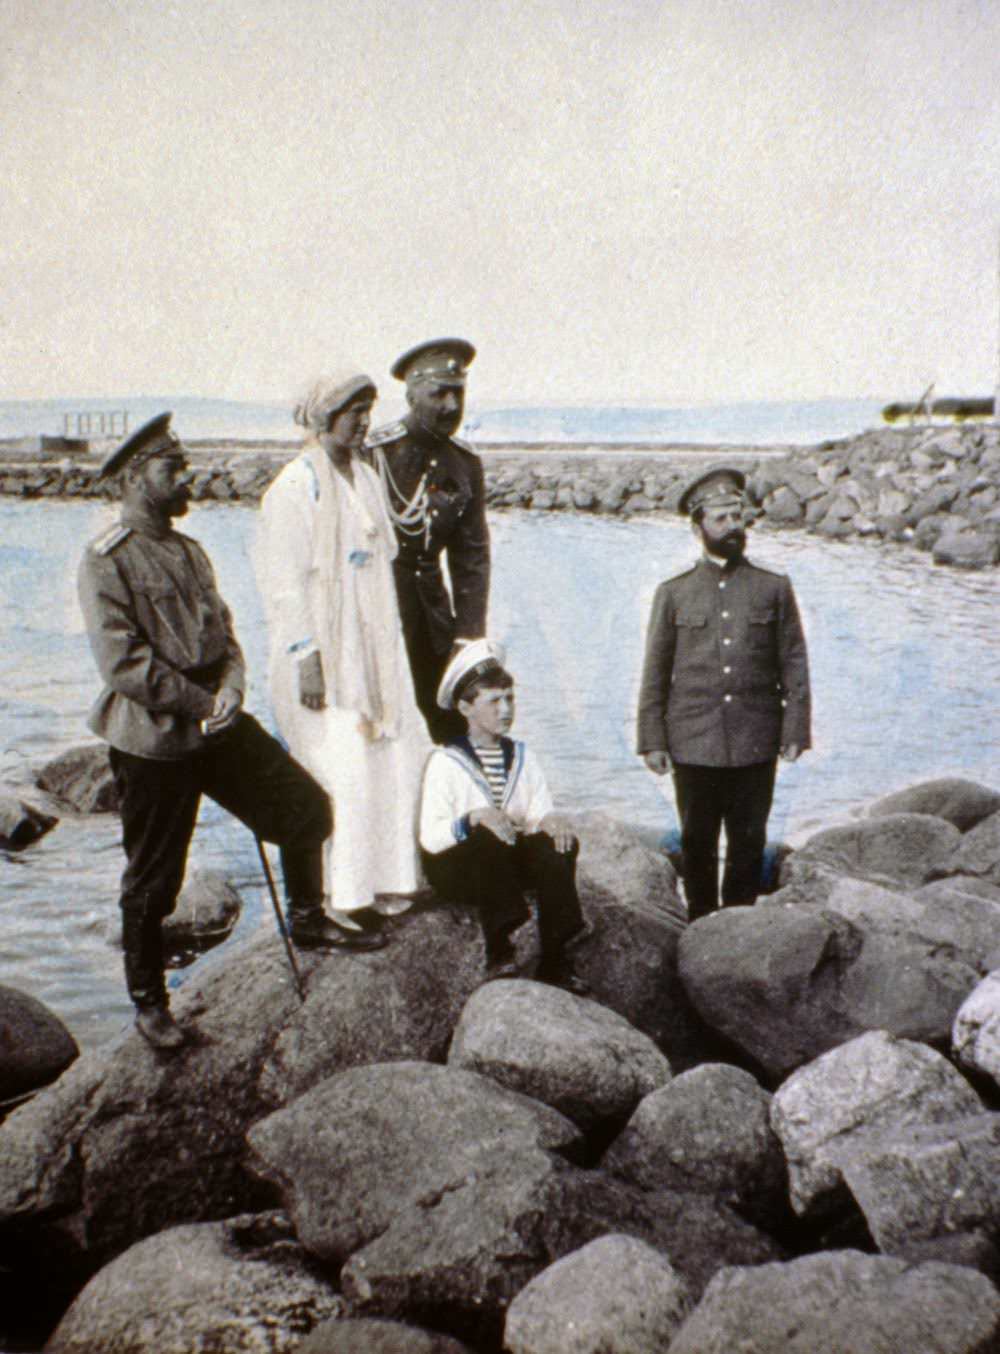 The Tsar (at left) and family.